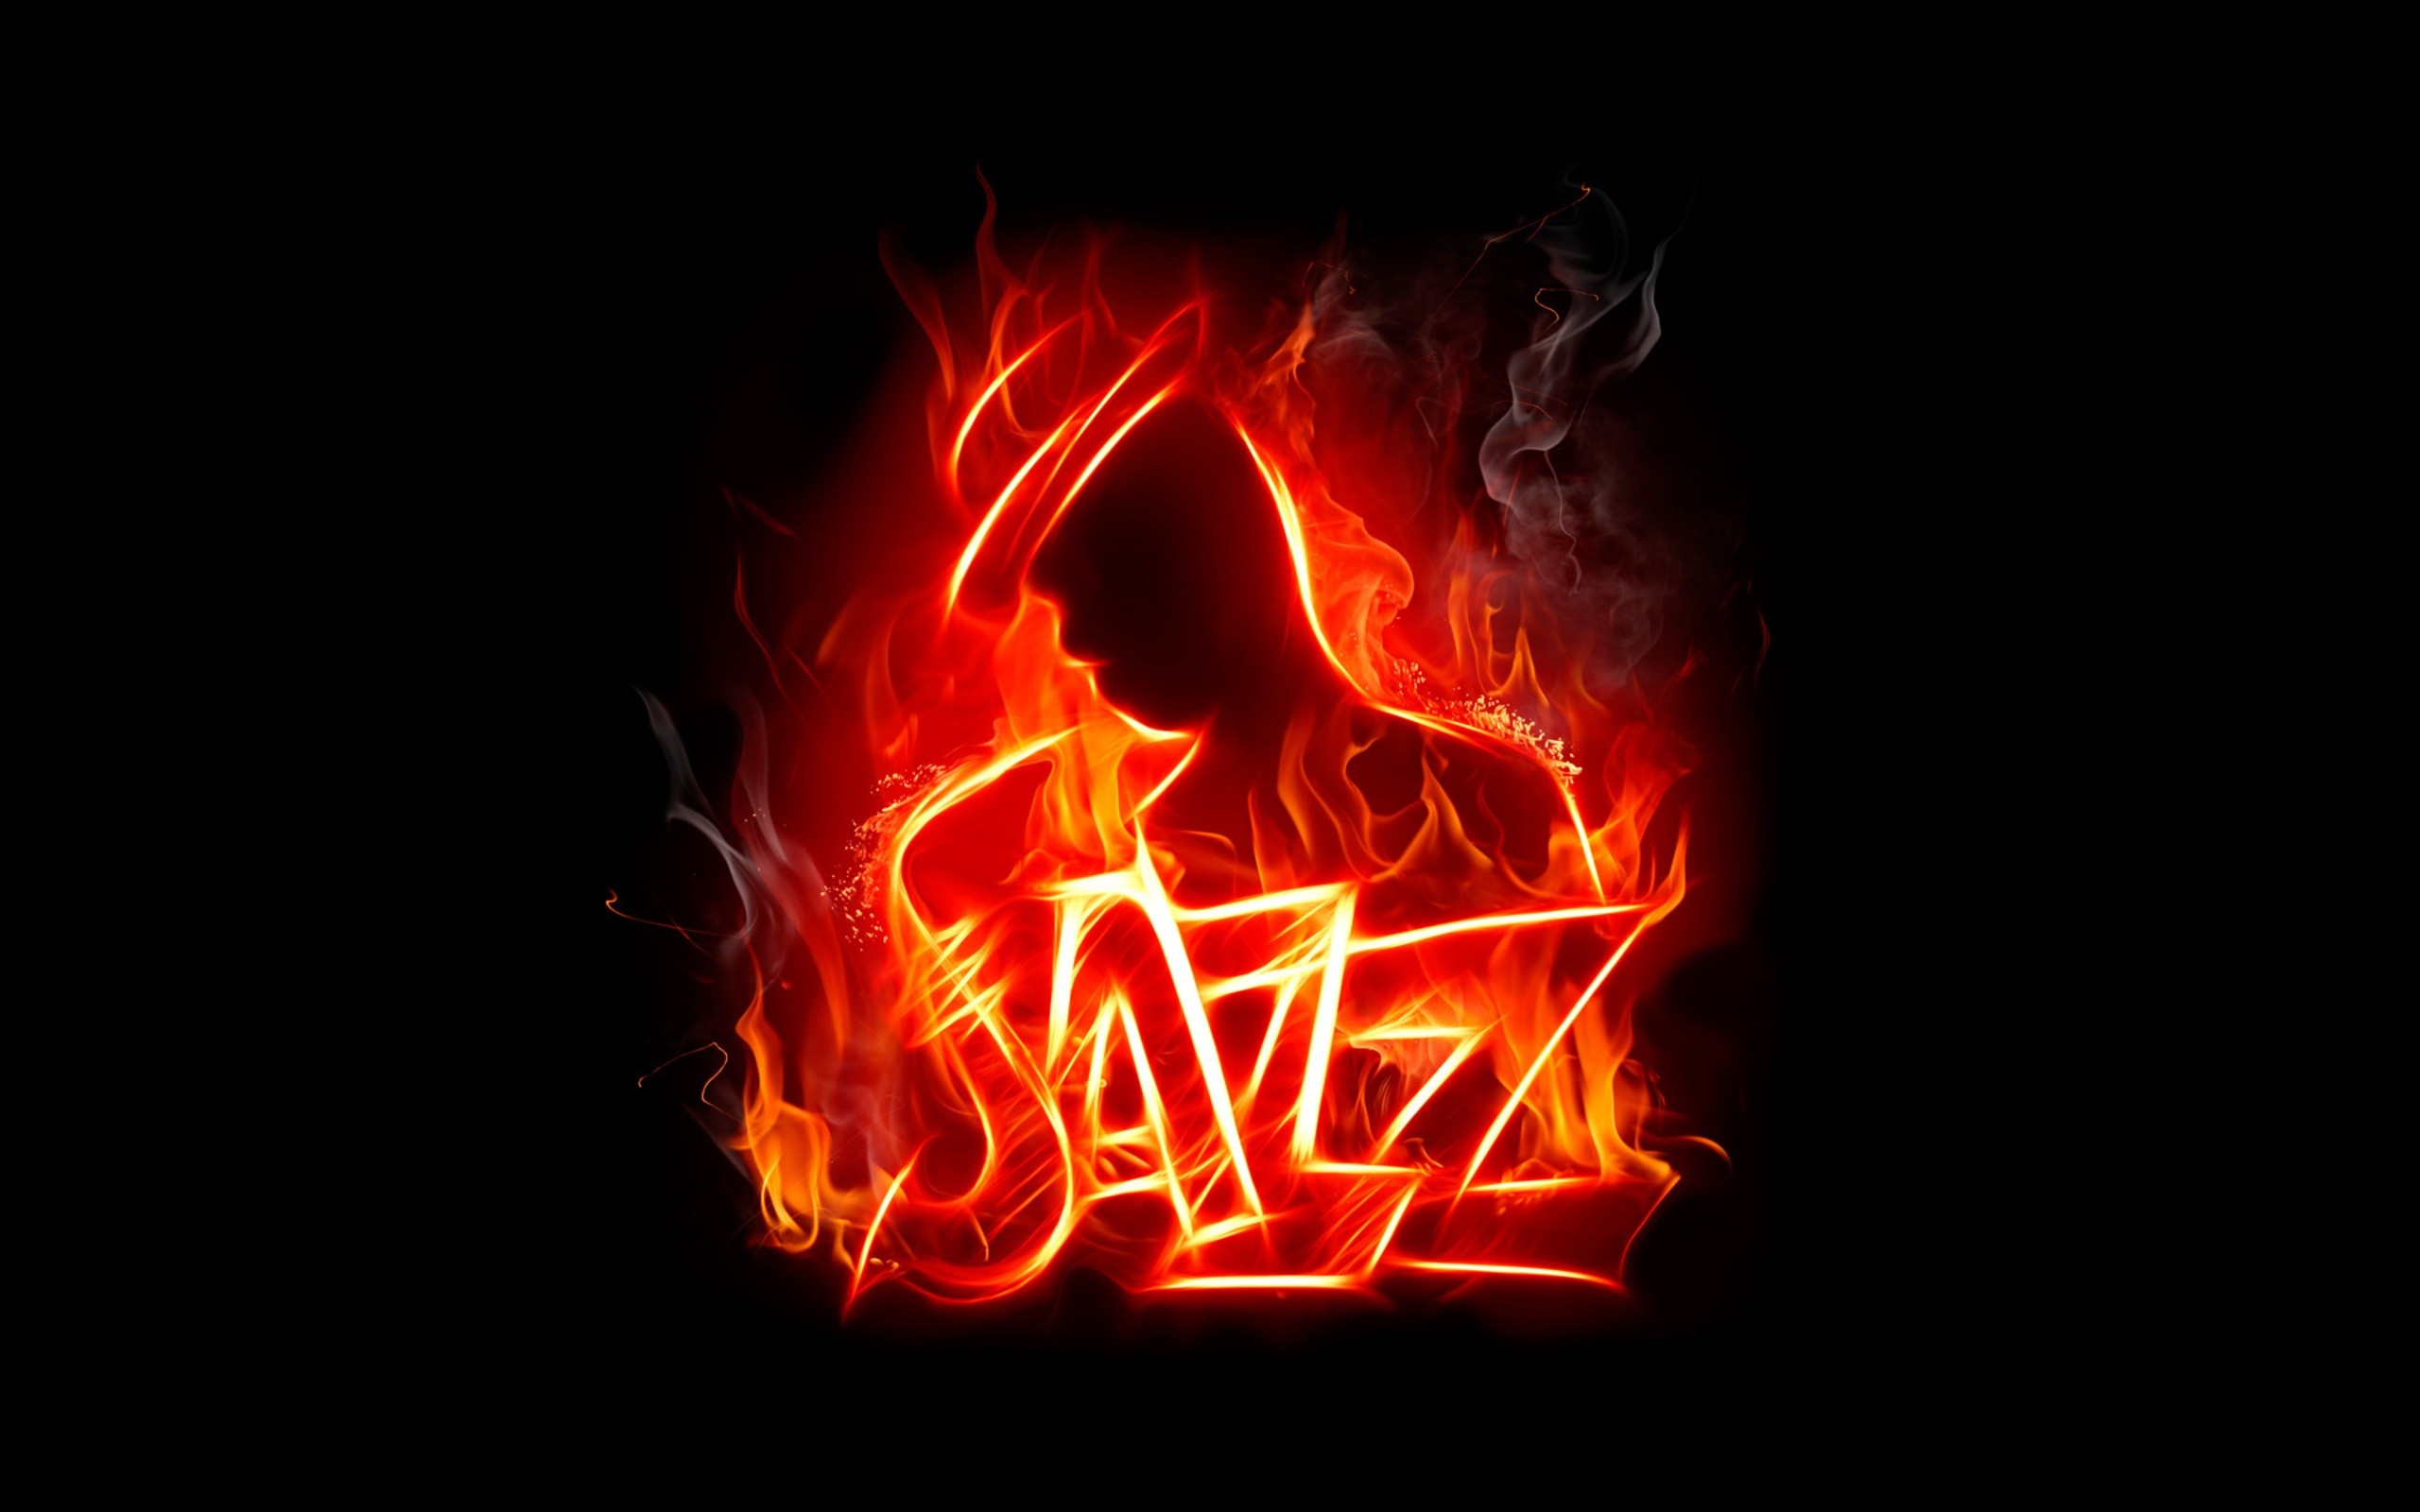 Abstract Music Fire Jazz Flaming Black Background Wallpaper